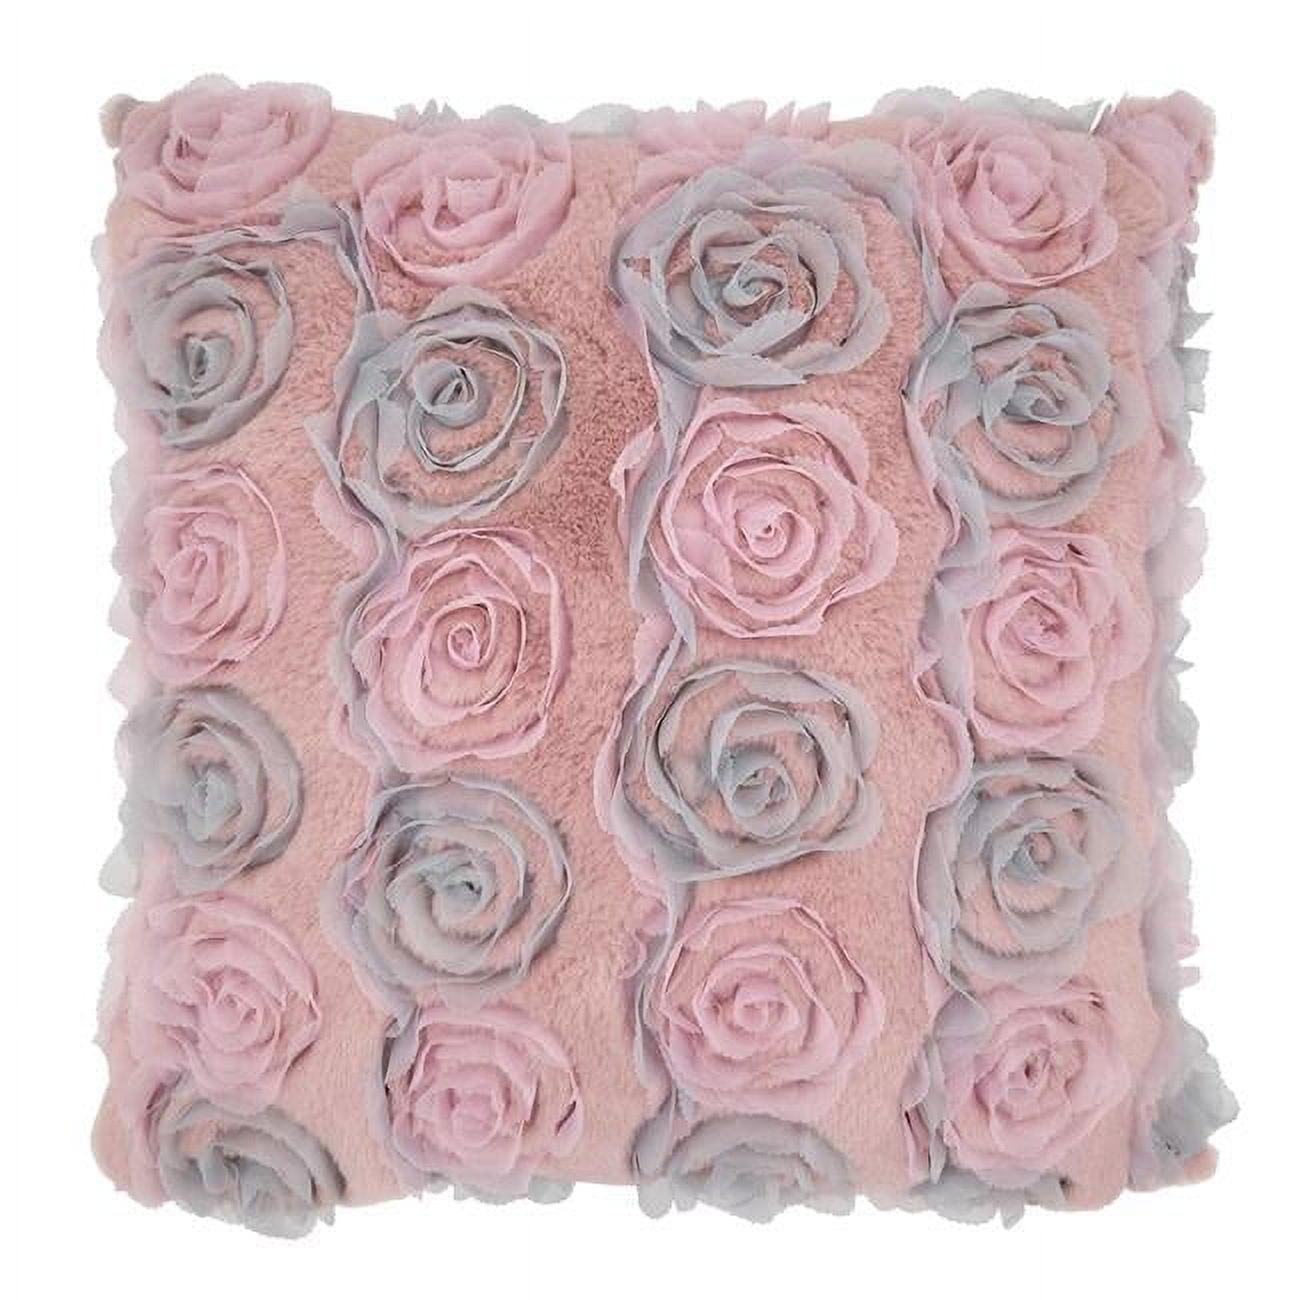 Charming Rose Wedding Cake Textured Polyester Pillow Cover